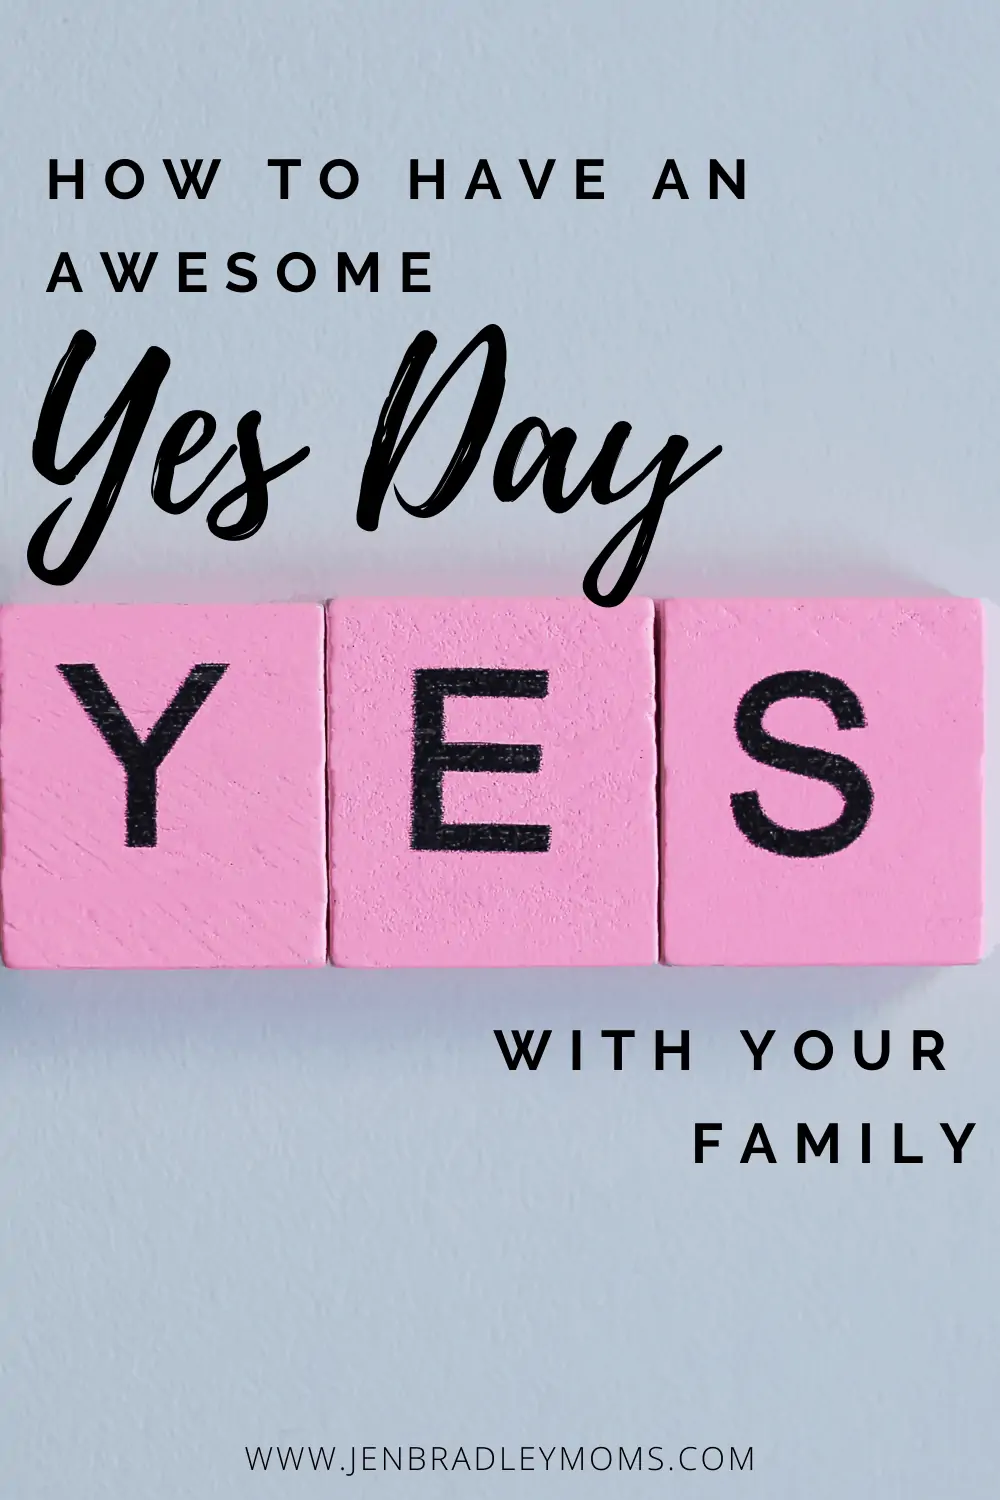 Yes Day for Kids - Pros and Cons (How to Make it Fun for Your Family!)